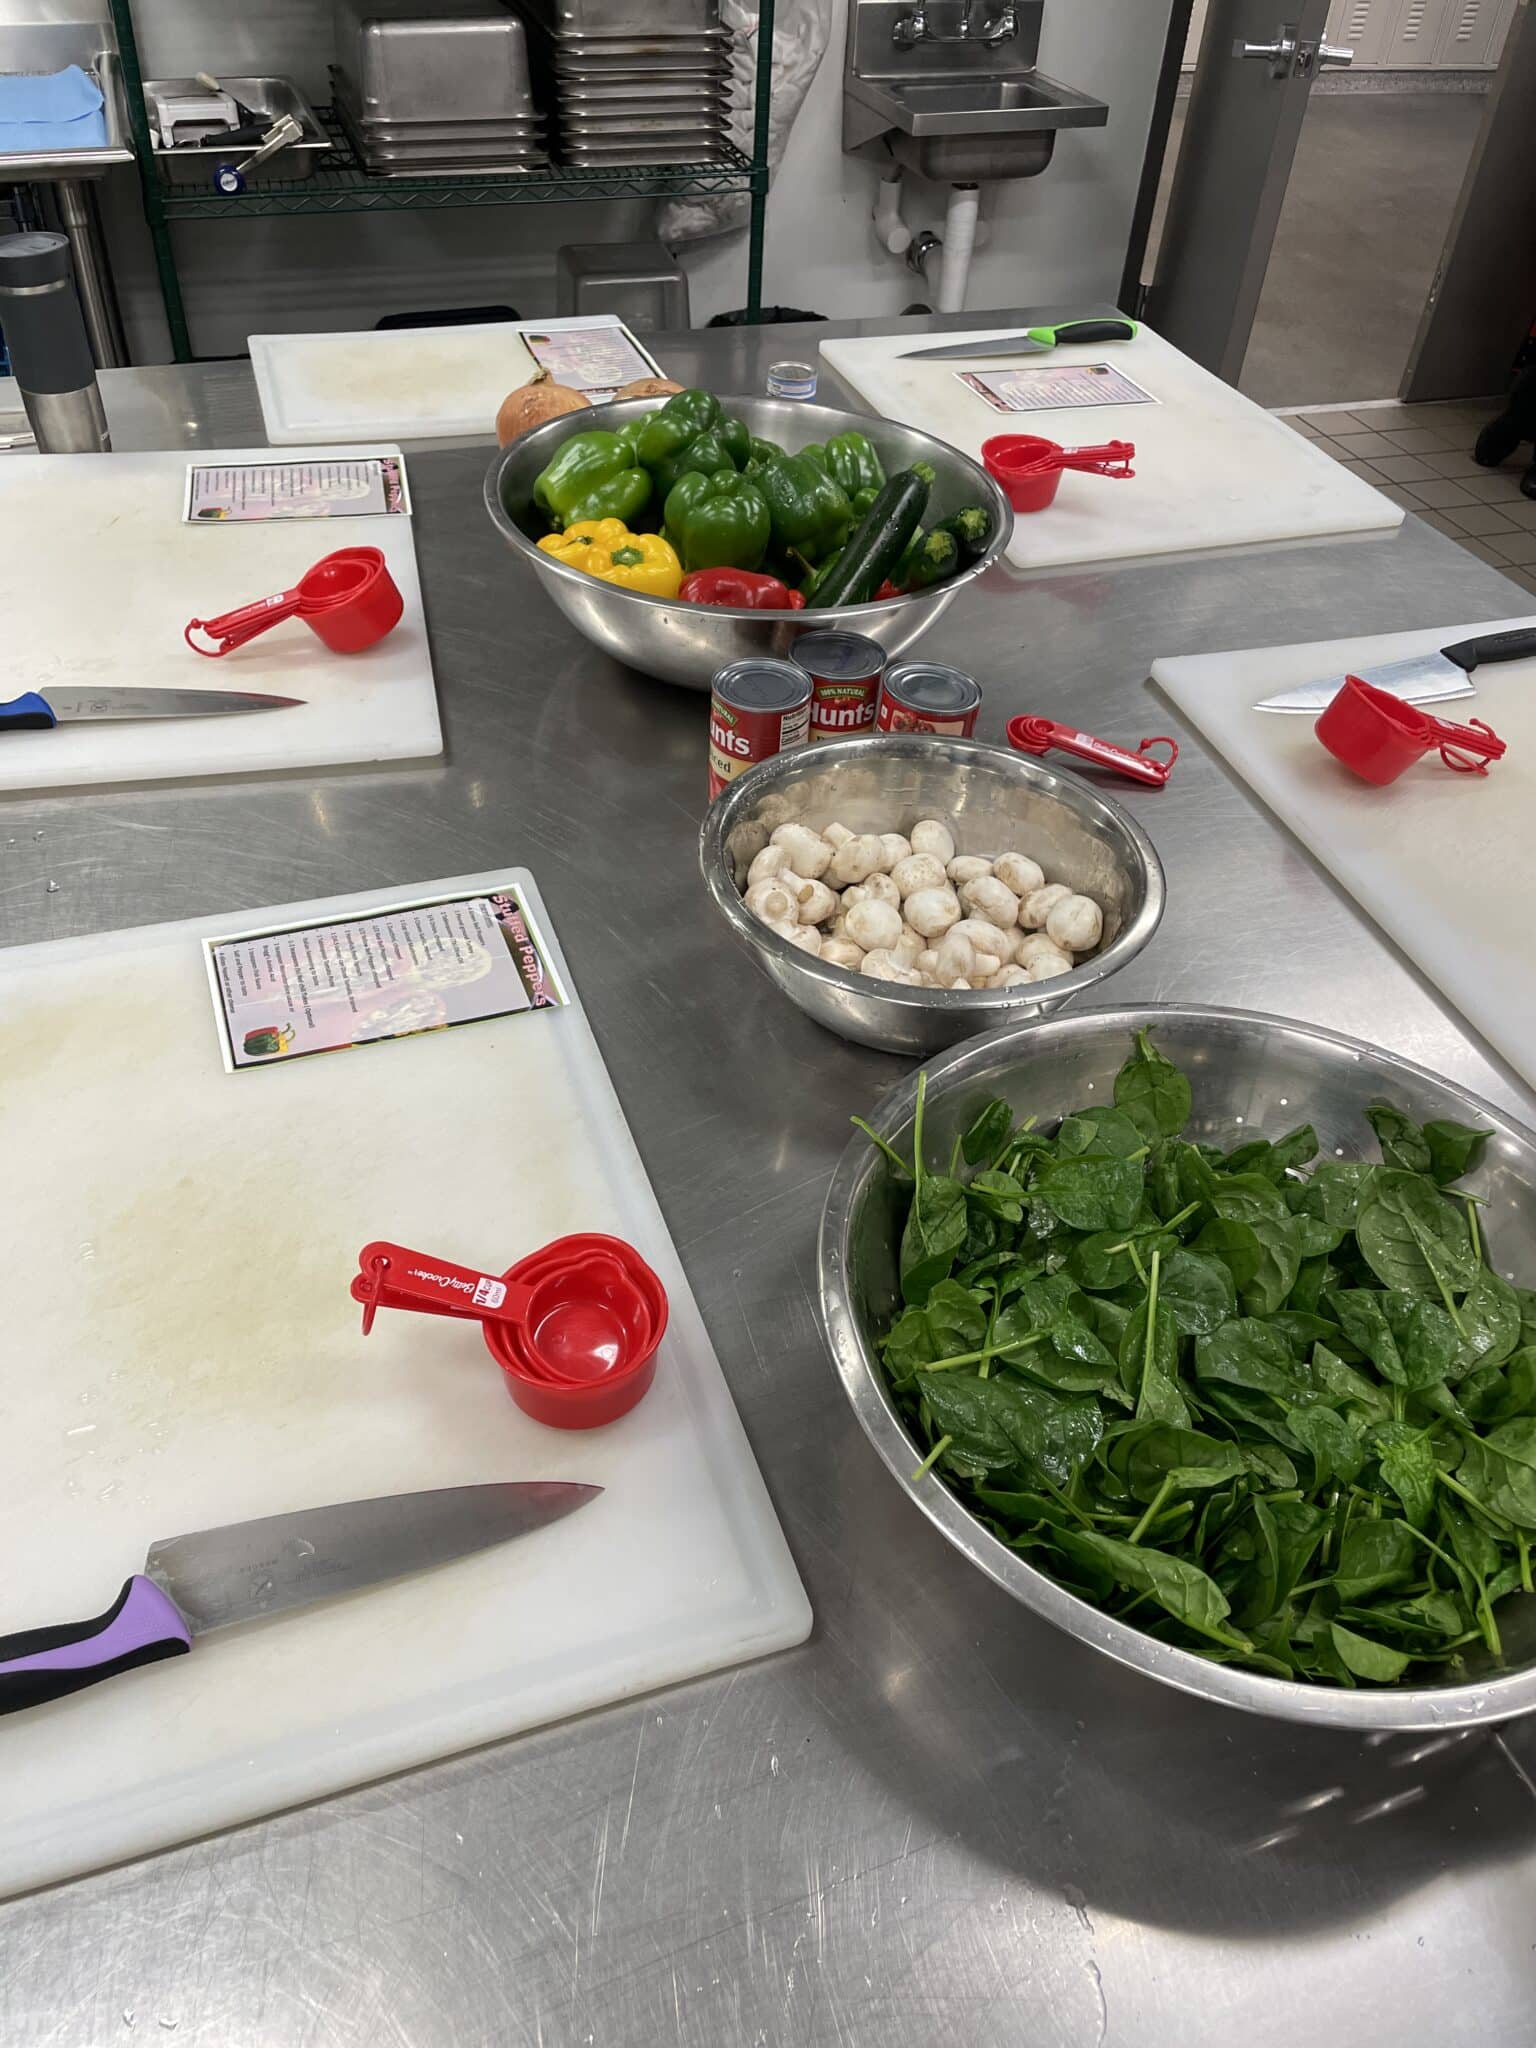 Image shows a table with bowls of fresh spinach, mushrooms, bell peppers, ready to be cut up